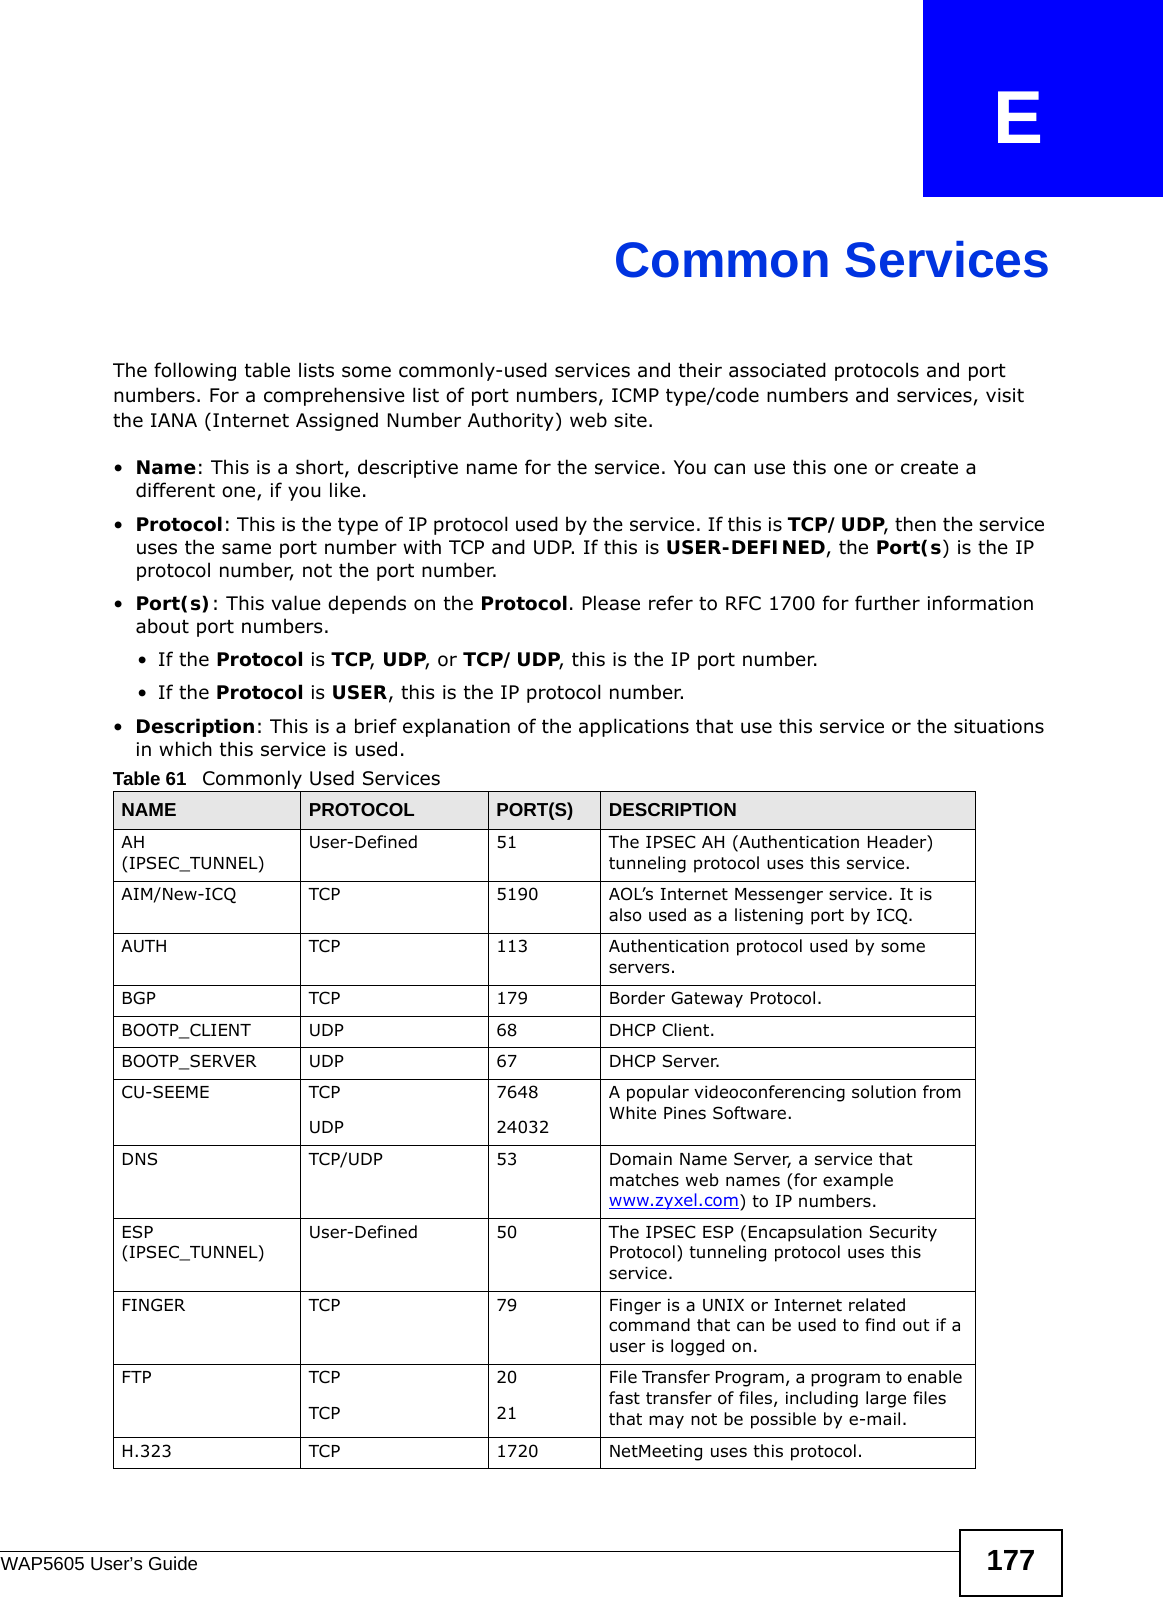 WAP5605 User’s Guide 177APPENDIX   ECommon ServicesThe following table lists some commonly-used services and their associated protocols and port numbers. For a comprehensive list of port numbers, ICMP type/code numbers and services, visit the IANA (Internet Assigned Number Authority) web site. •Name: This is a short, descriptive name for the service. You can use this one or create a different one, if you like.•Protocol: This is the type of IP protocol used by the service. If this is TCP/UDP, then the service uses the same port number with TCP and UDP. If this is USER-DEFINED, the Port(s) is the IP protocol number, not the port number.•Port(s): This value depends on the Protocol. Please refer to RFC 1700 for further information about port numbers.•If the Protocol is TCP, UDP, or TCP/UDP, this is the IP port number.•If the Protocol is USER, this is the IP protocol number.•Description: This is a brief explanation of the applications that use this service or the situations in which this service is used.Table 61   Commonly Used ServicesNAME PROTOCOL PORT(S) DESCRIPTIONAH (IPSEC_TUNNEL)User-Defined 51 The IPSEC AH (Authentication Header) tunneling protocol uses this service.AIM/New-ICQ TCP 5190 AOL’s Internet Messenger service. It is also used as a listening port by ICQ.AUTH TCP 113 Authentication protocol used by some servers.BGP TCP 179 Border Gateway Protocol.BOOTP_CLIENT UDP 68 DHCP Client.BOOTP_SERVER UDP 67 DHCP Server.CU-SEEME TCPUDP764824032A popular videoconferencing solution from White Pines Software.DNS TCP/UDP 53 Domain Name Server, a service that matches web names (for example www.zyxel.com) to IP numbers.ESP (IPSEC_TUNNEL)User-Defined 50 The IPSEC ESP (Encapsulation Security Protocol) tunneling protocol uses this service.FINGER TCP 79 Finger is a UNIX or Internet related command that can be used to find out if a user is logged on.FTP TCPTCP2021File Transfer Program, a program to enable fast transfer of files, including large files that may not be possible by e-mail.H.323 TCP 1720 NetMeeting uses this protocol.